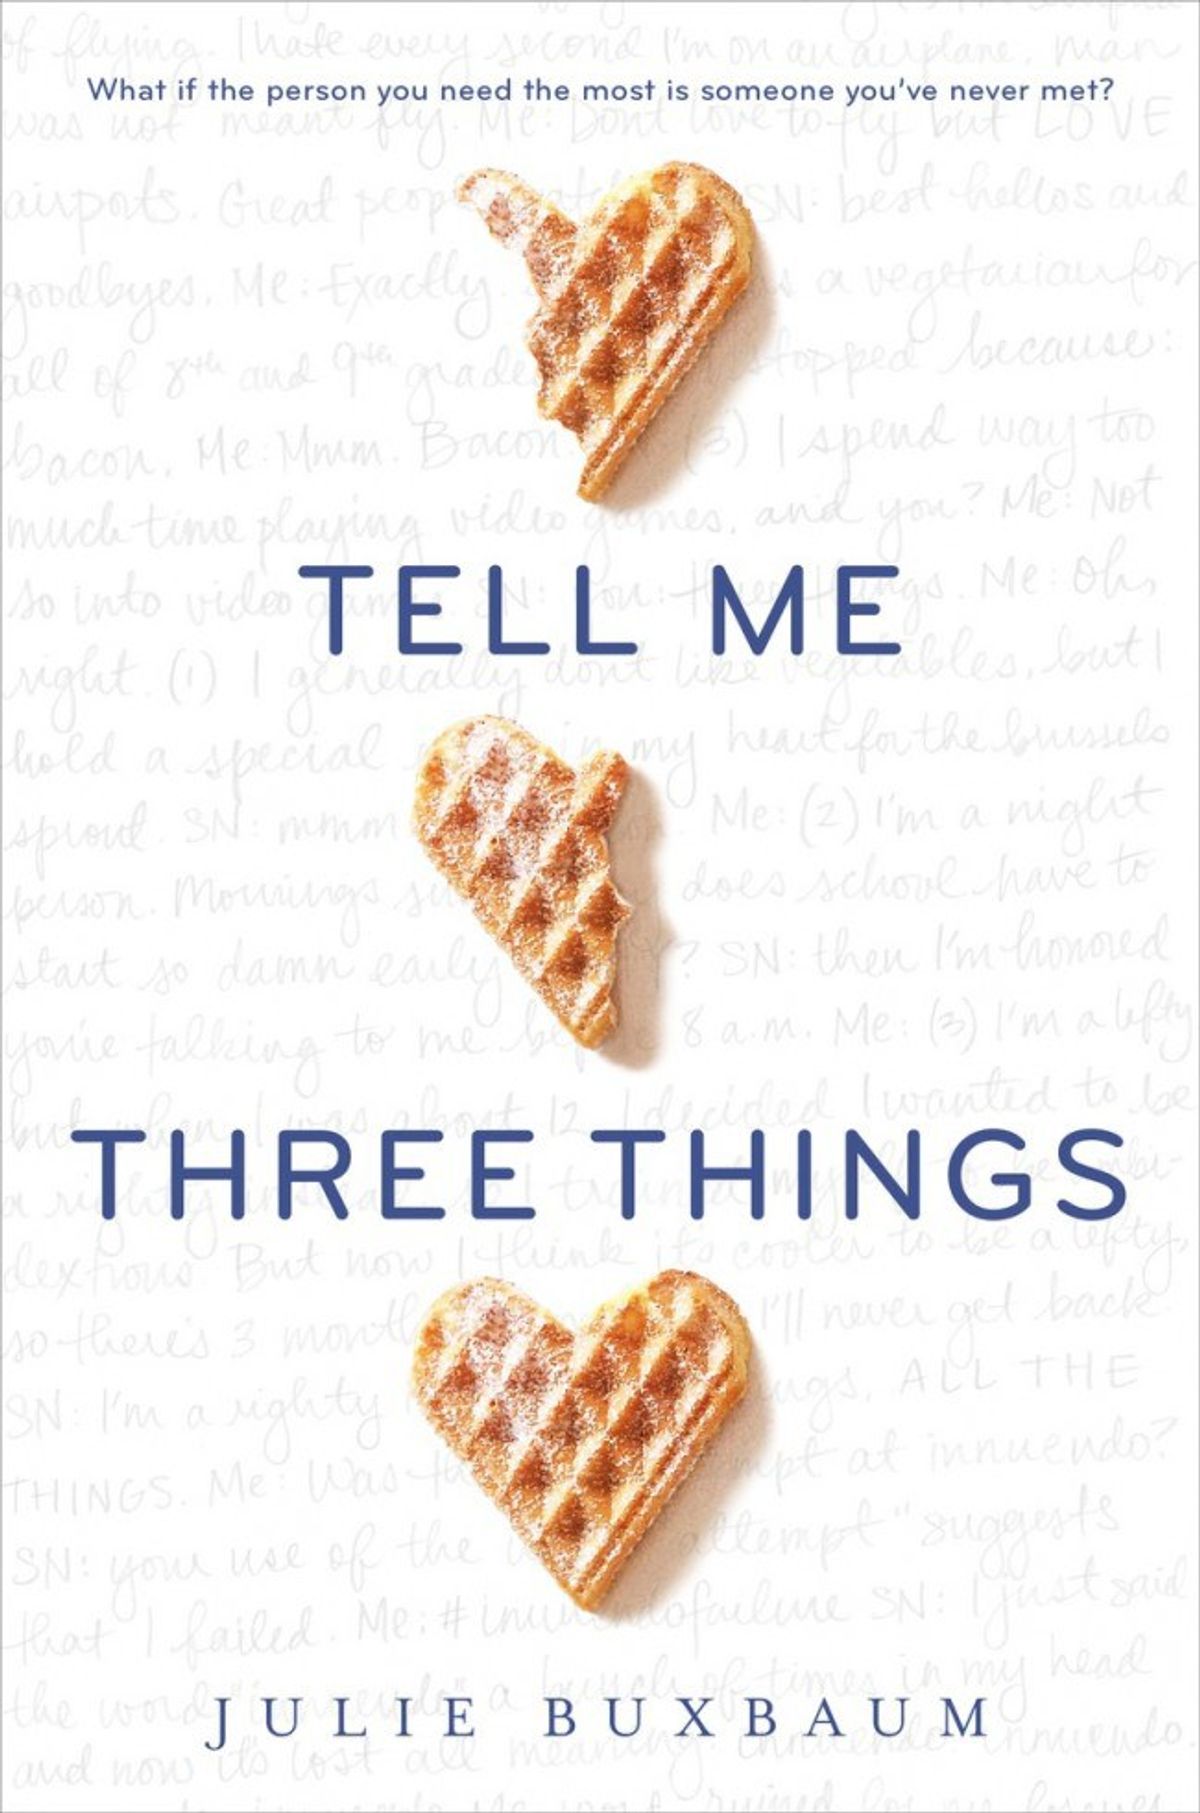 A Book Review Of 'Tell Me Three Things' By Julie Buxbaum